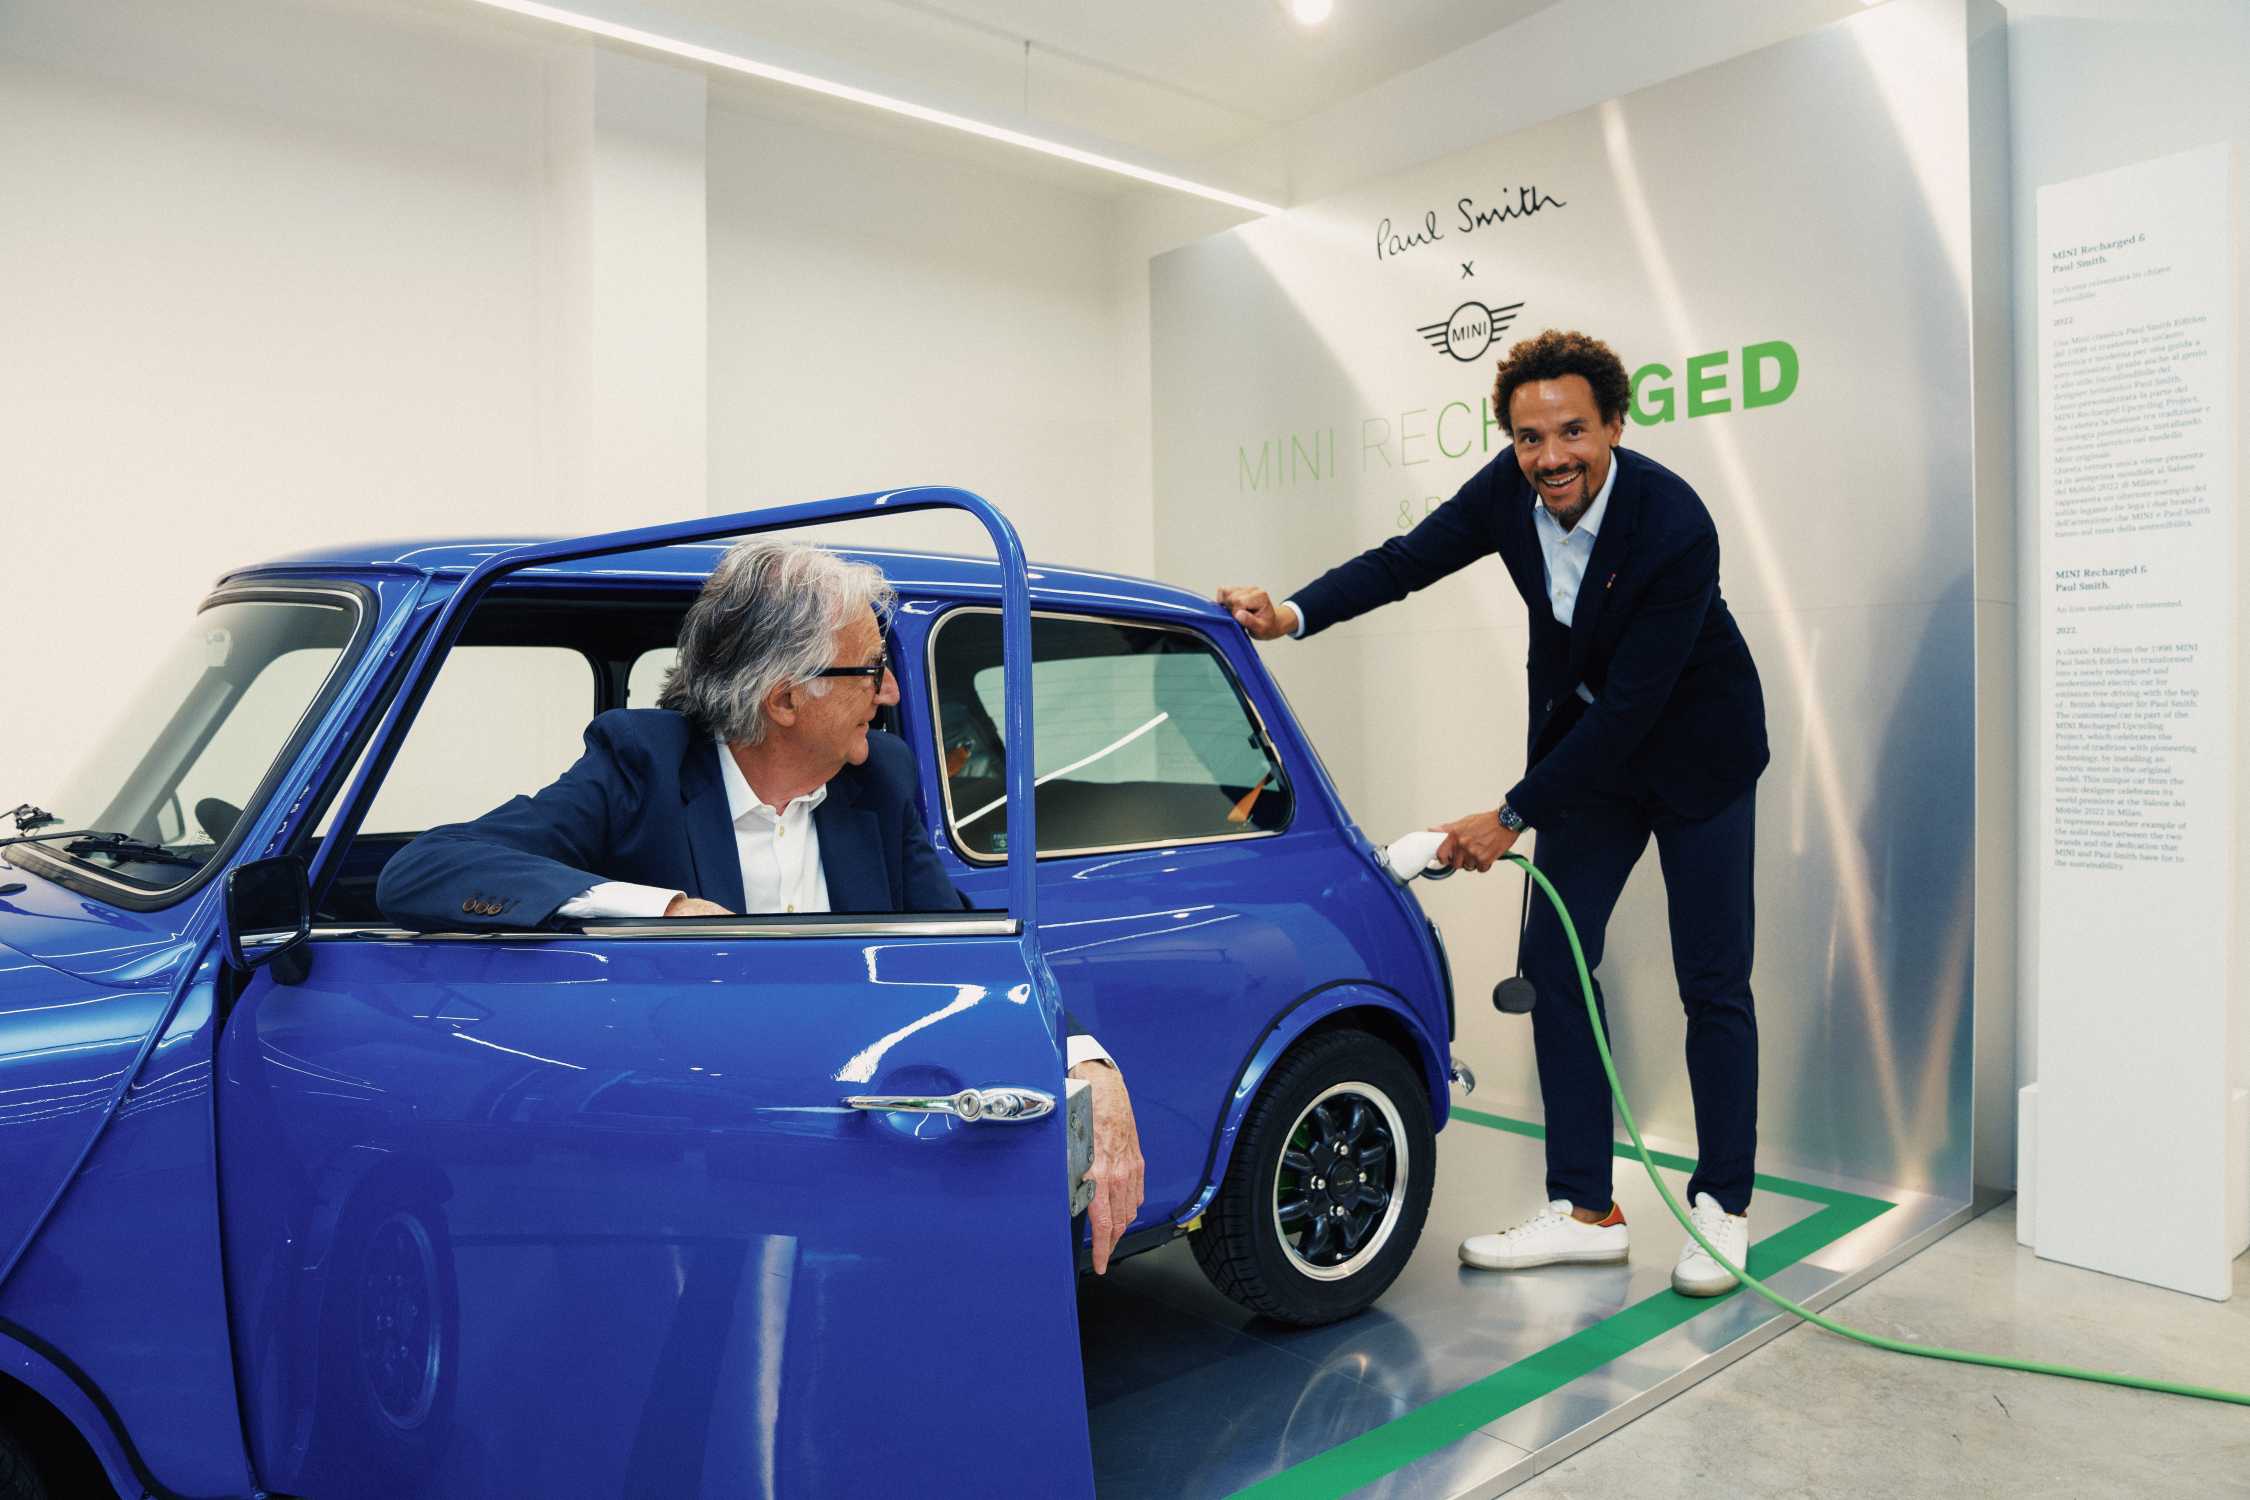 MINI Recharged & Paul Smith: An icon sustainably reinvented